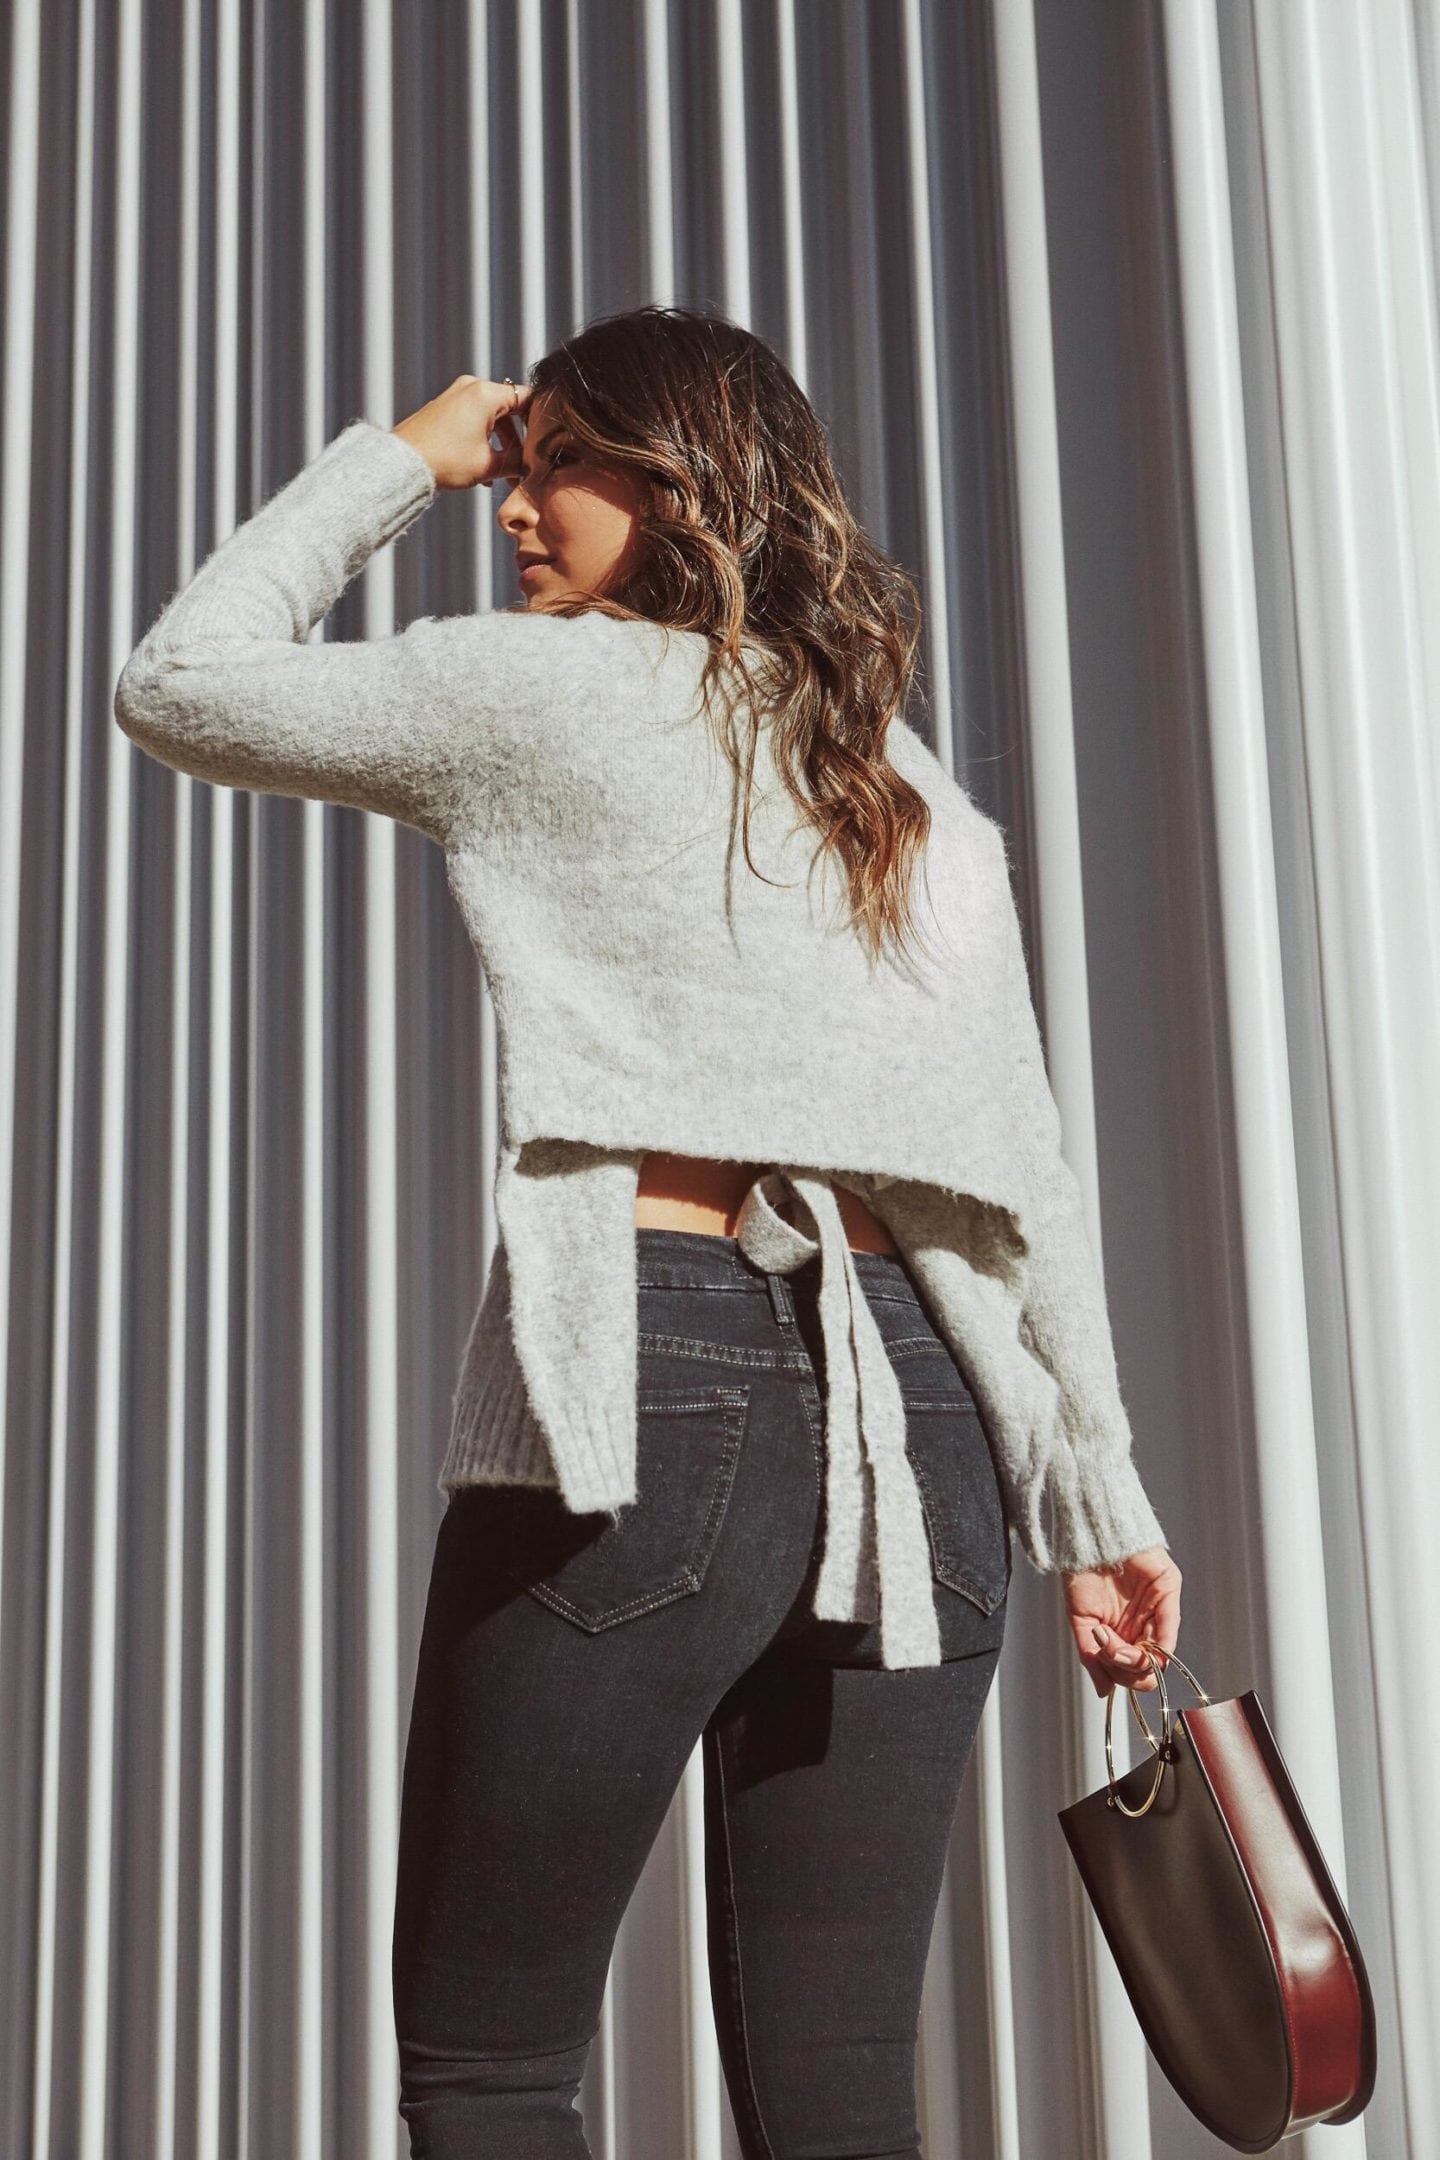 How to Freshen Up Your Winter Wardrobe - Gray Knit Sweater with Tie Back Detailing and Dark Denim | Thegirlfrompanama.com